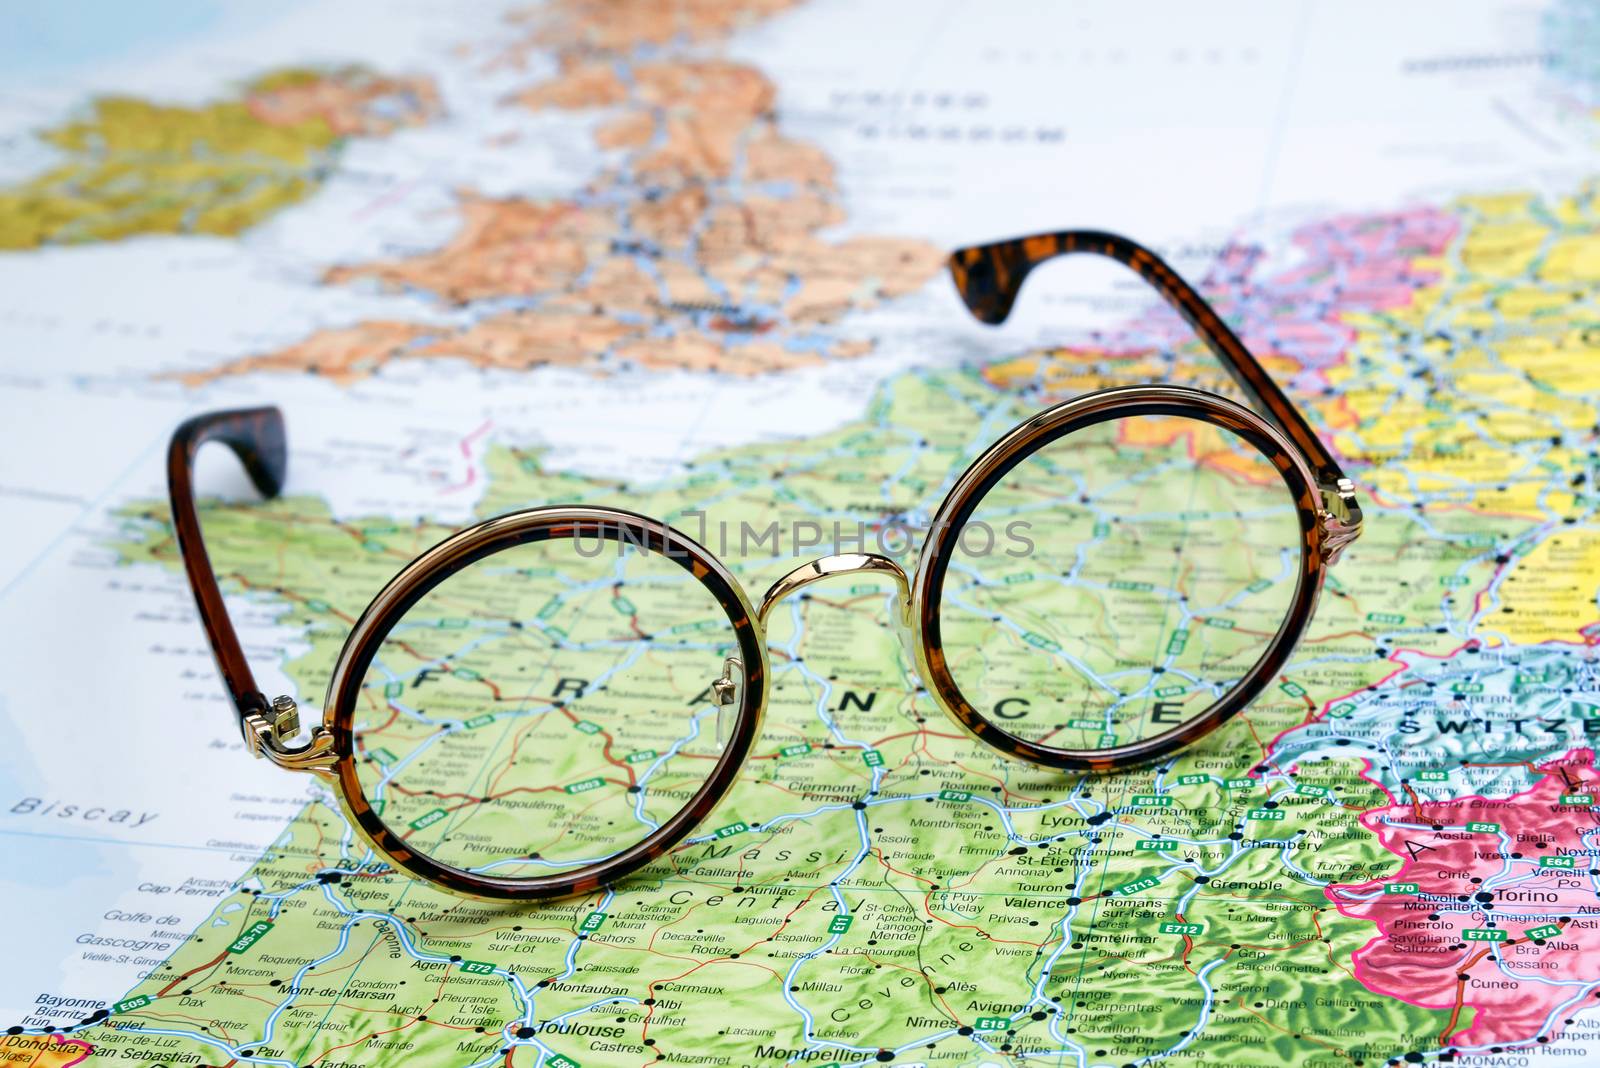 Photo of glasses on a map of europe. Focus on France. May be used as illustration for traveling theme.